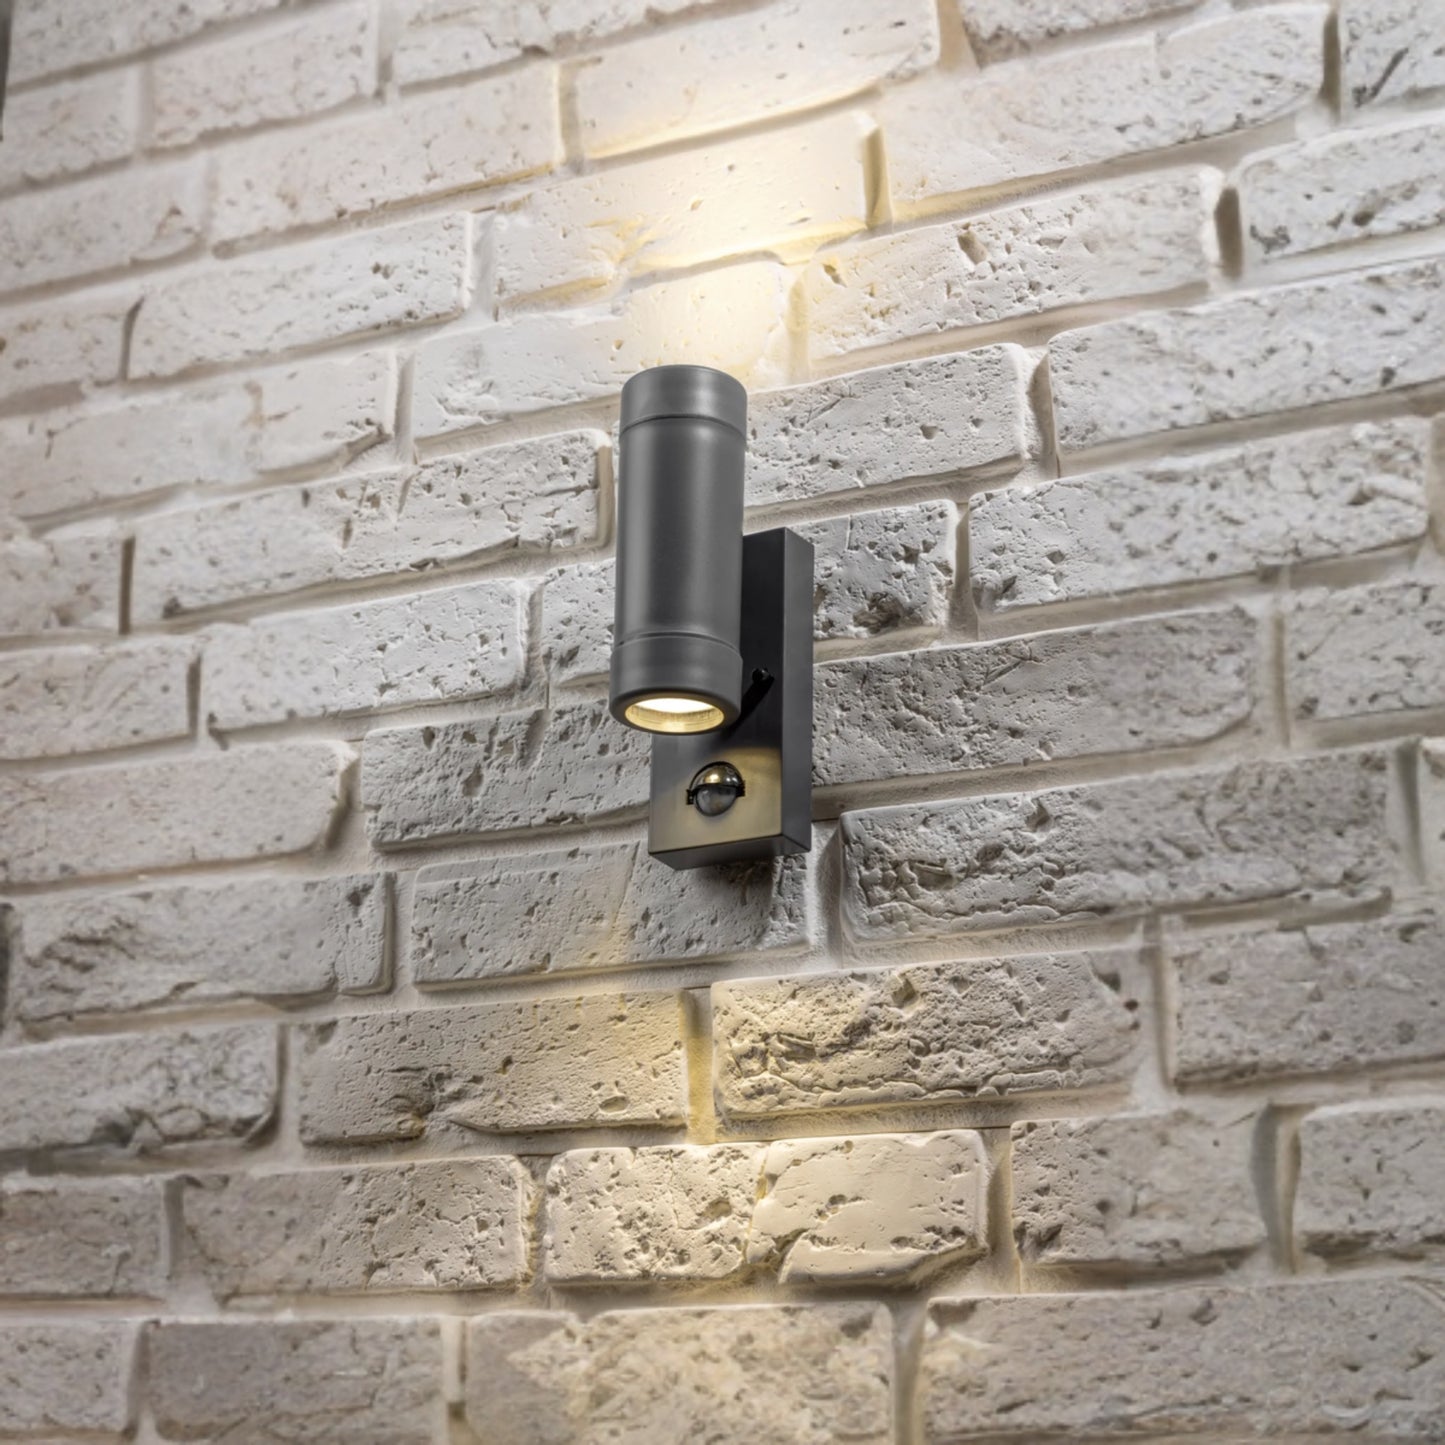 Our Valentine dark grey outdoor wall mounted up and down cylinder outdoor light with motion sensor would look perfect in a modern or more traditional home design. Outside wall lights can provide atmospheric light in your garden, at the front door or on the terrace as well as a great security solution. It is designed for durability and longevity with its robust material producing a fully weatherproof and water resistant light fitting.